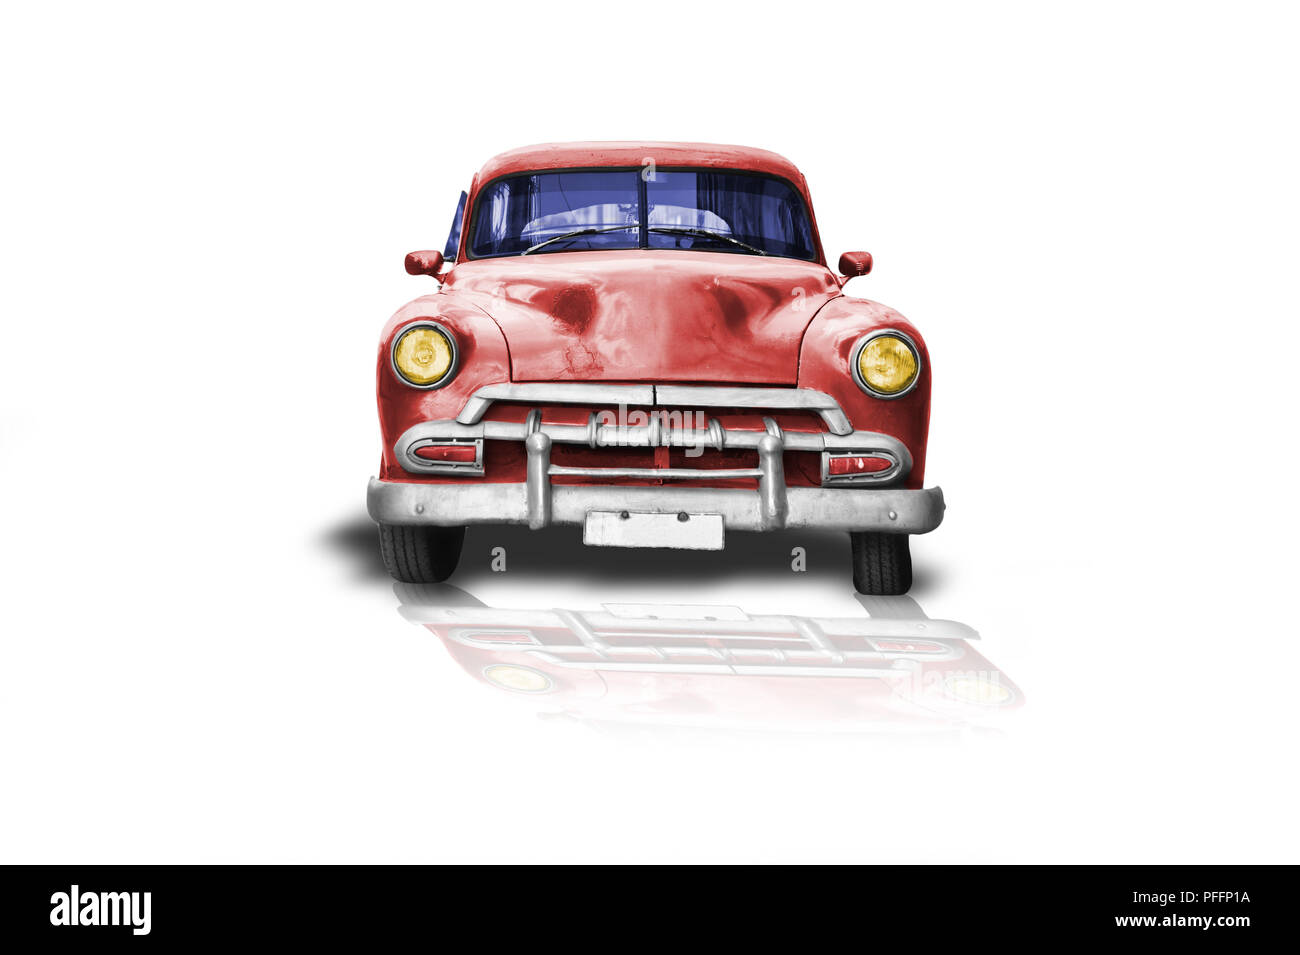 old red american car on white background Stock Photo